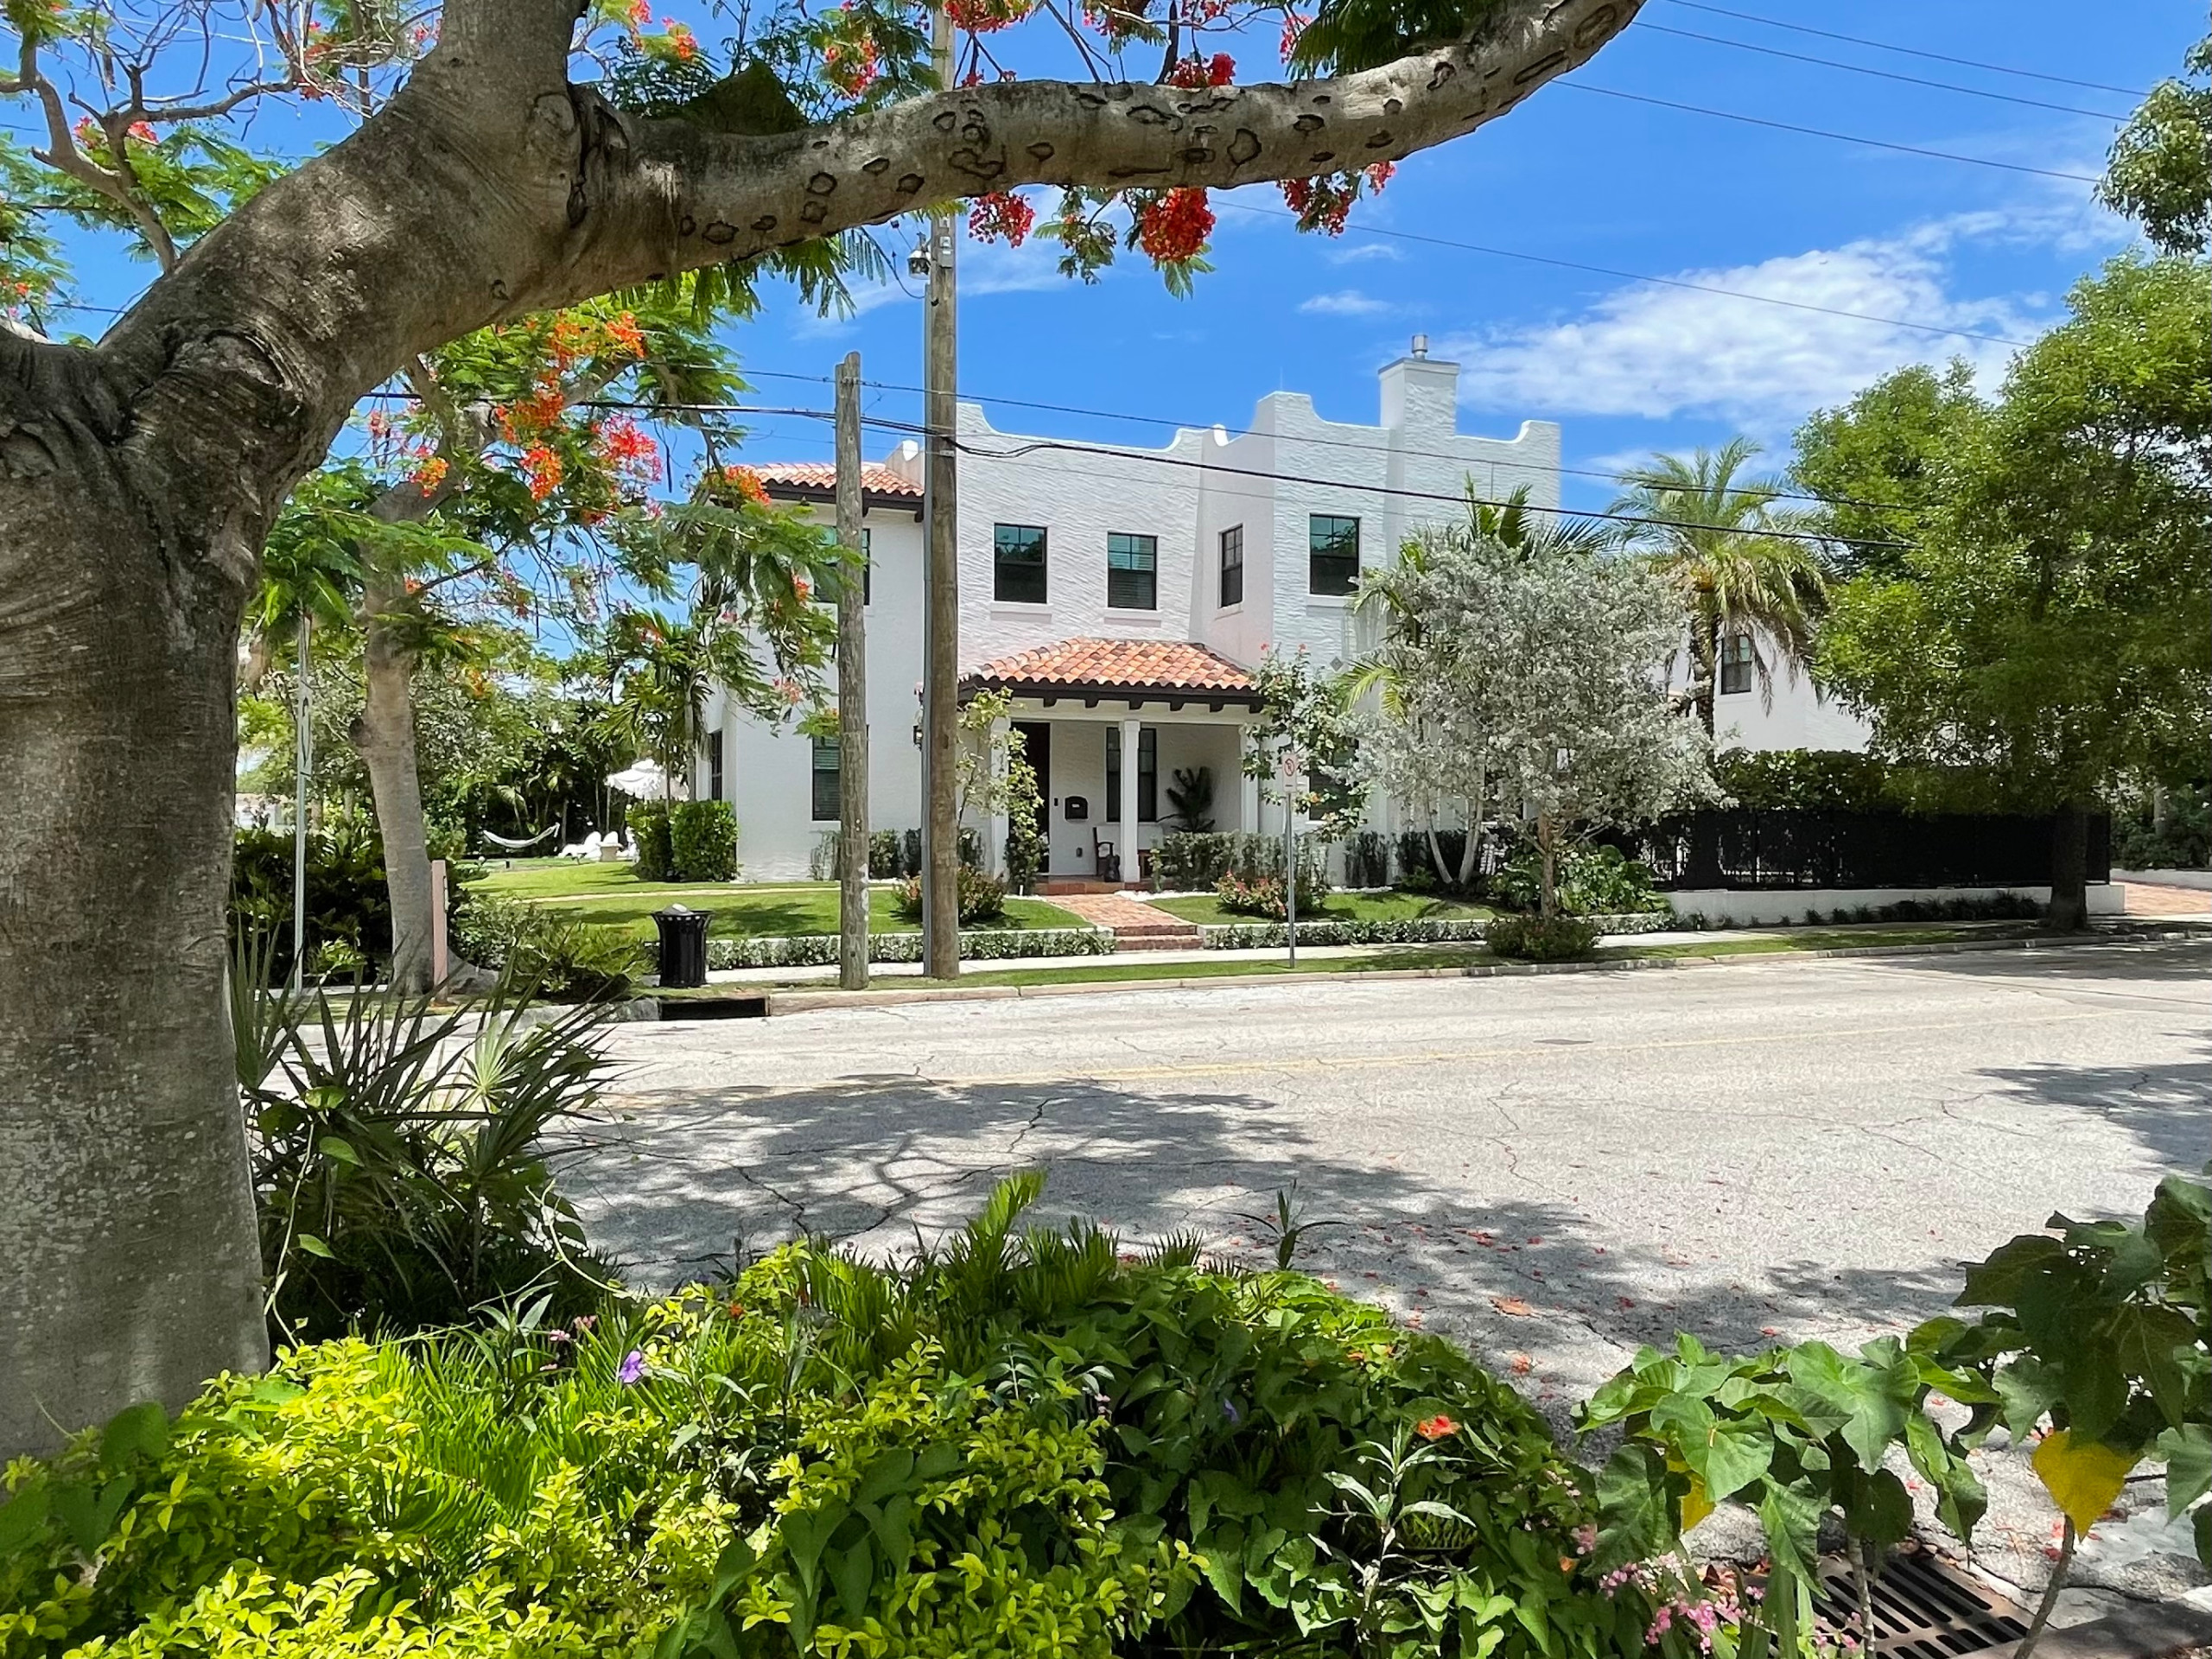 New Residence In Historic Flamingo Park, West Palm Beach